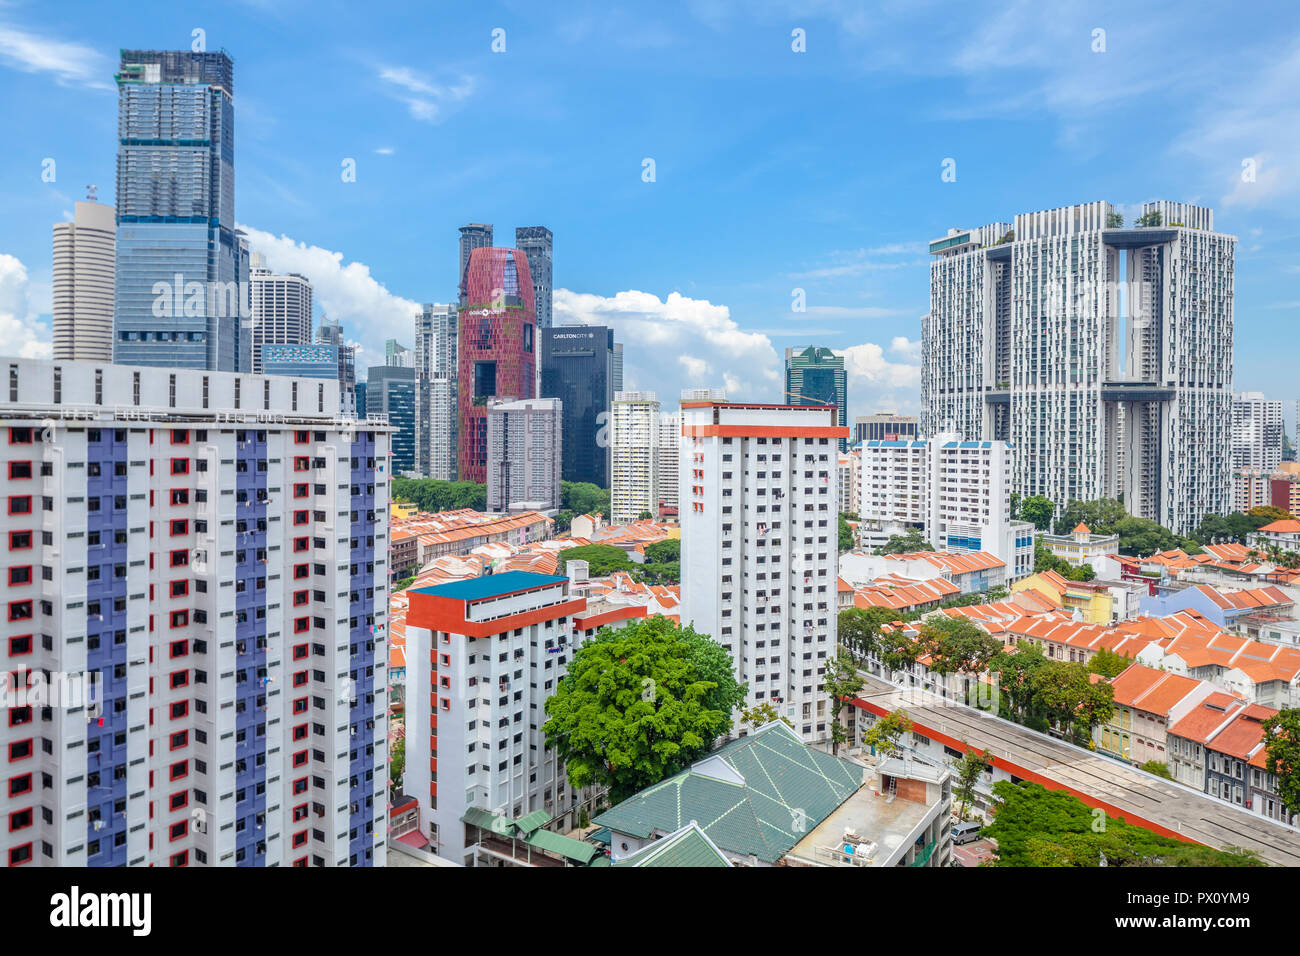 Cityscape of Singapore downtown (Tanjong Pagar) featuring conserved district of shophouses and high-rise public housing (The Pinnacle@Duxton) Stock Photo